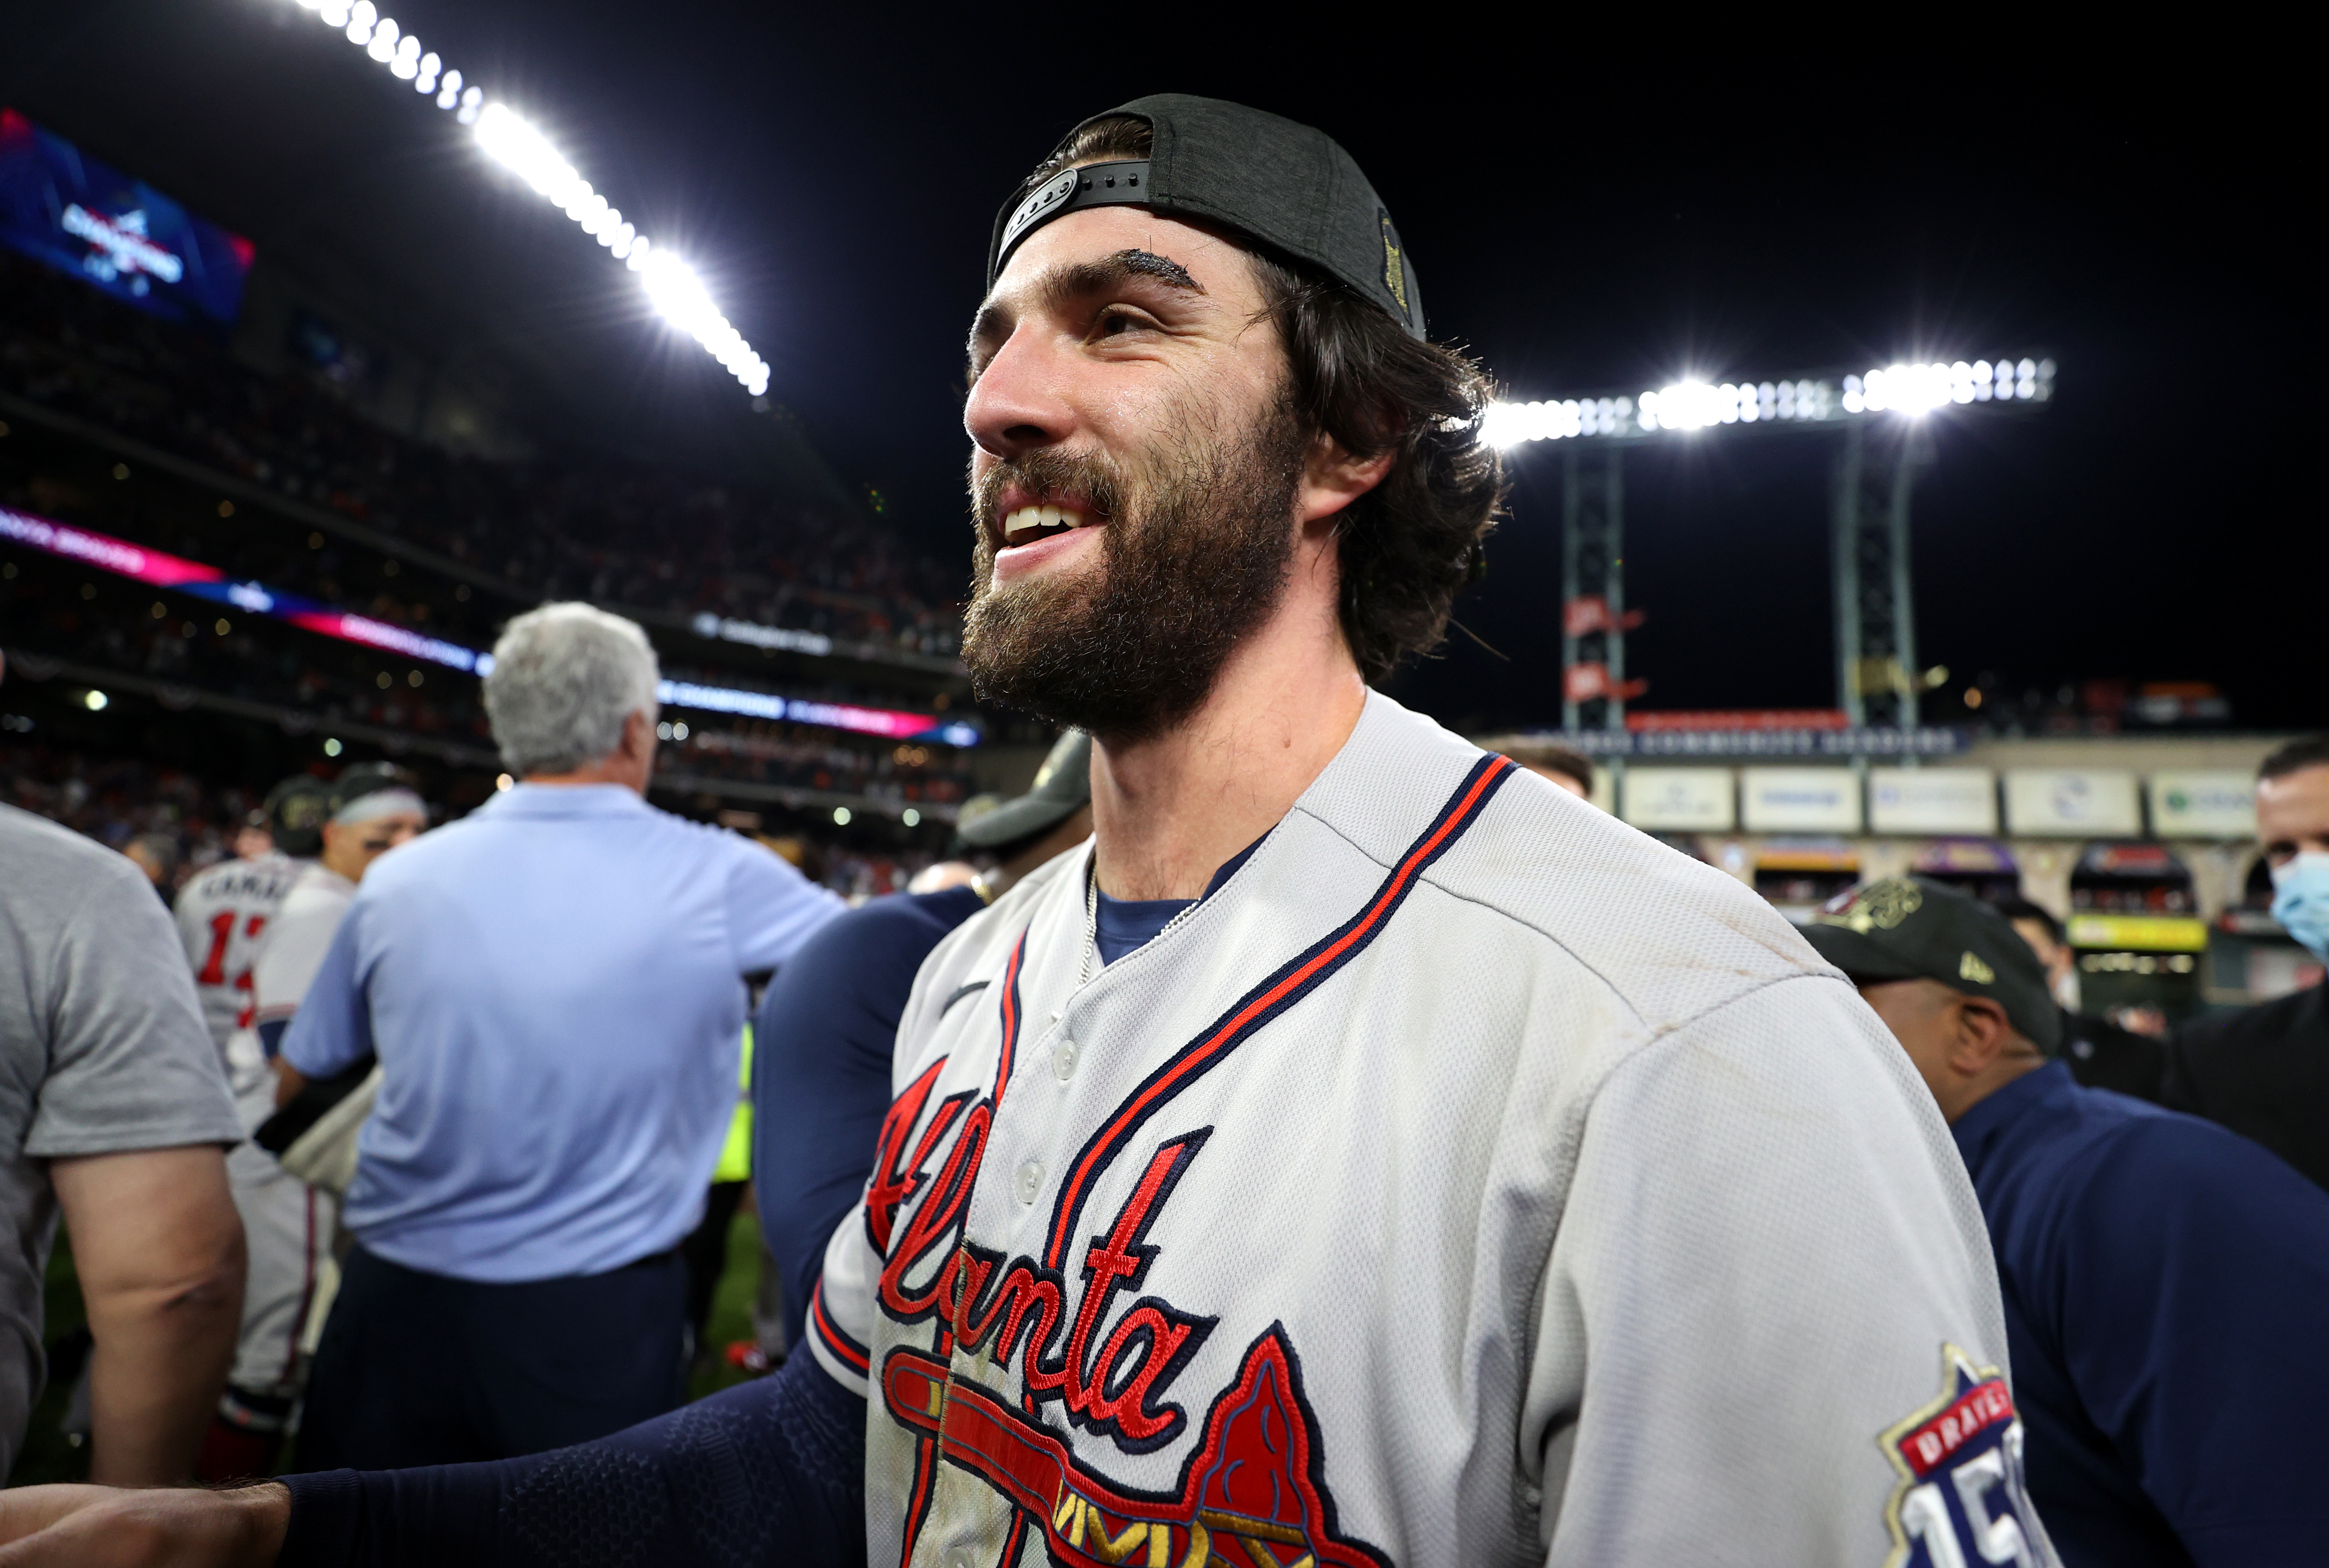 Braves star on World Series win: 'Wouldn't be here' without God